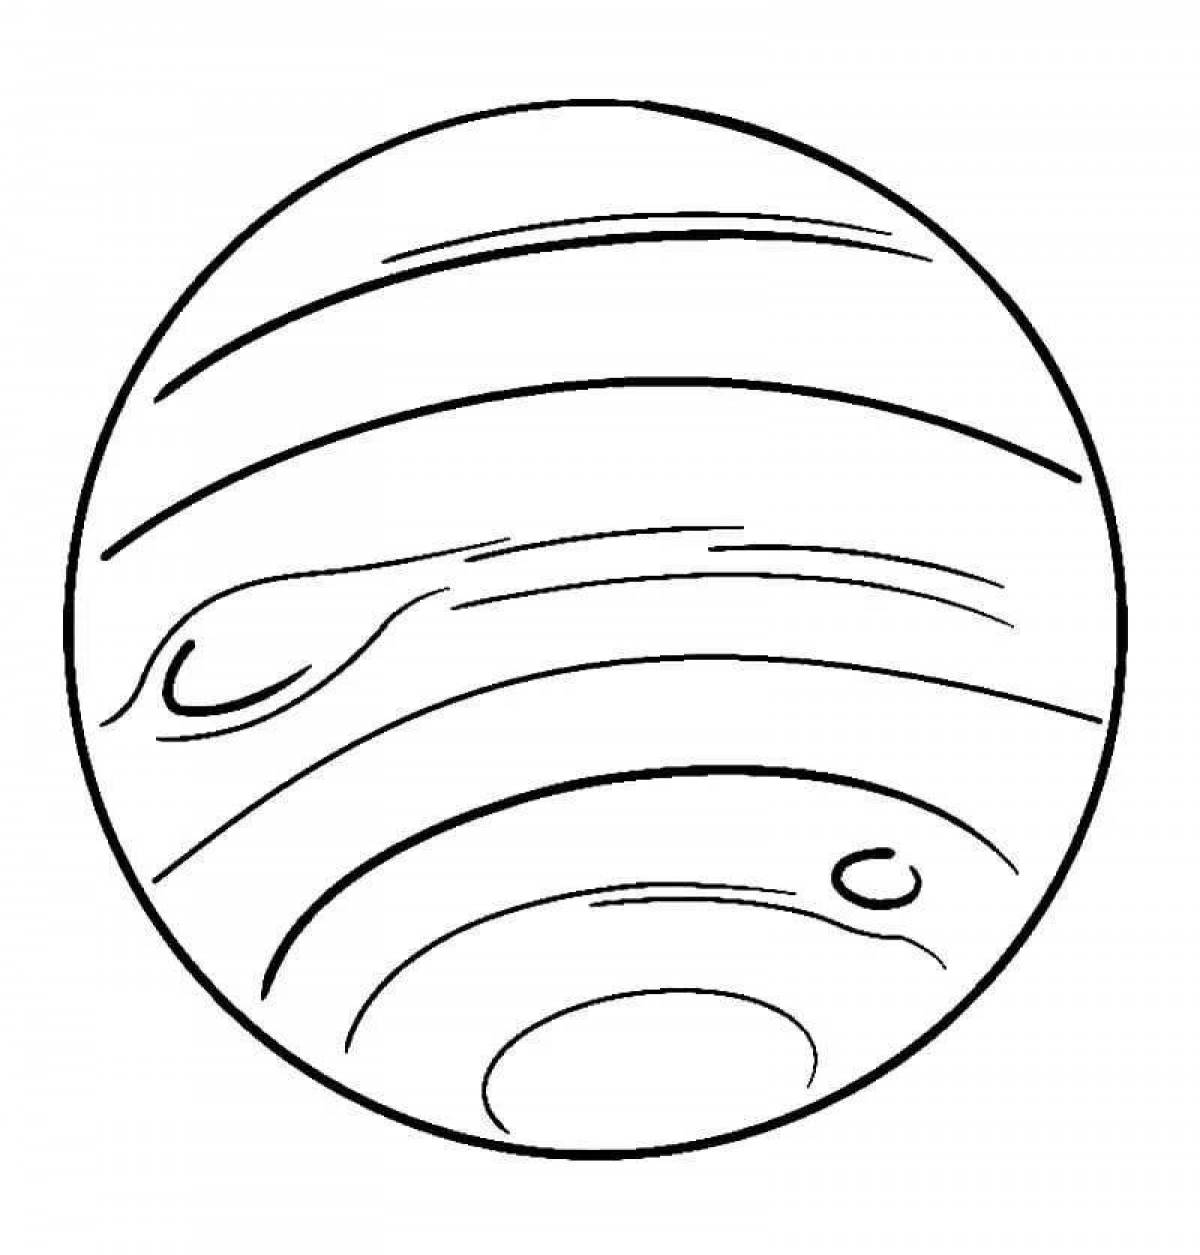 Brightly colored jupiter coloring book